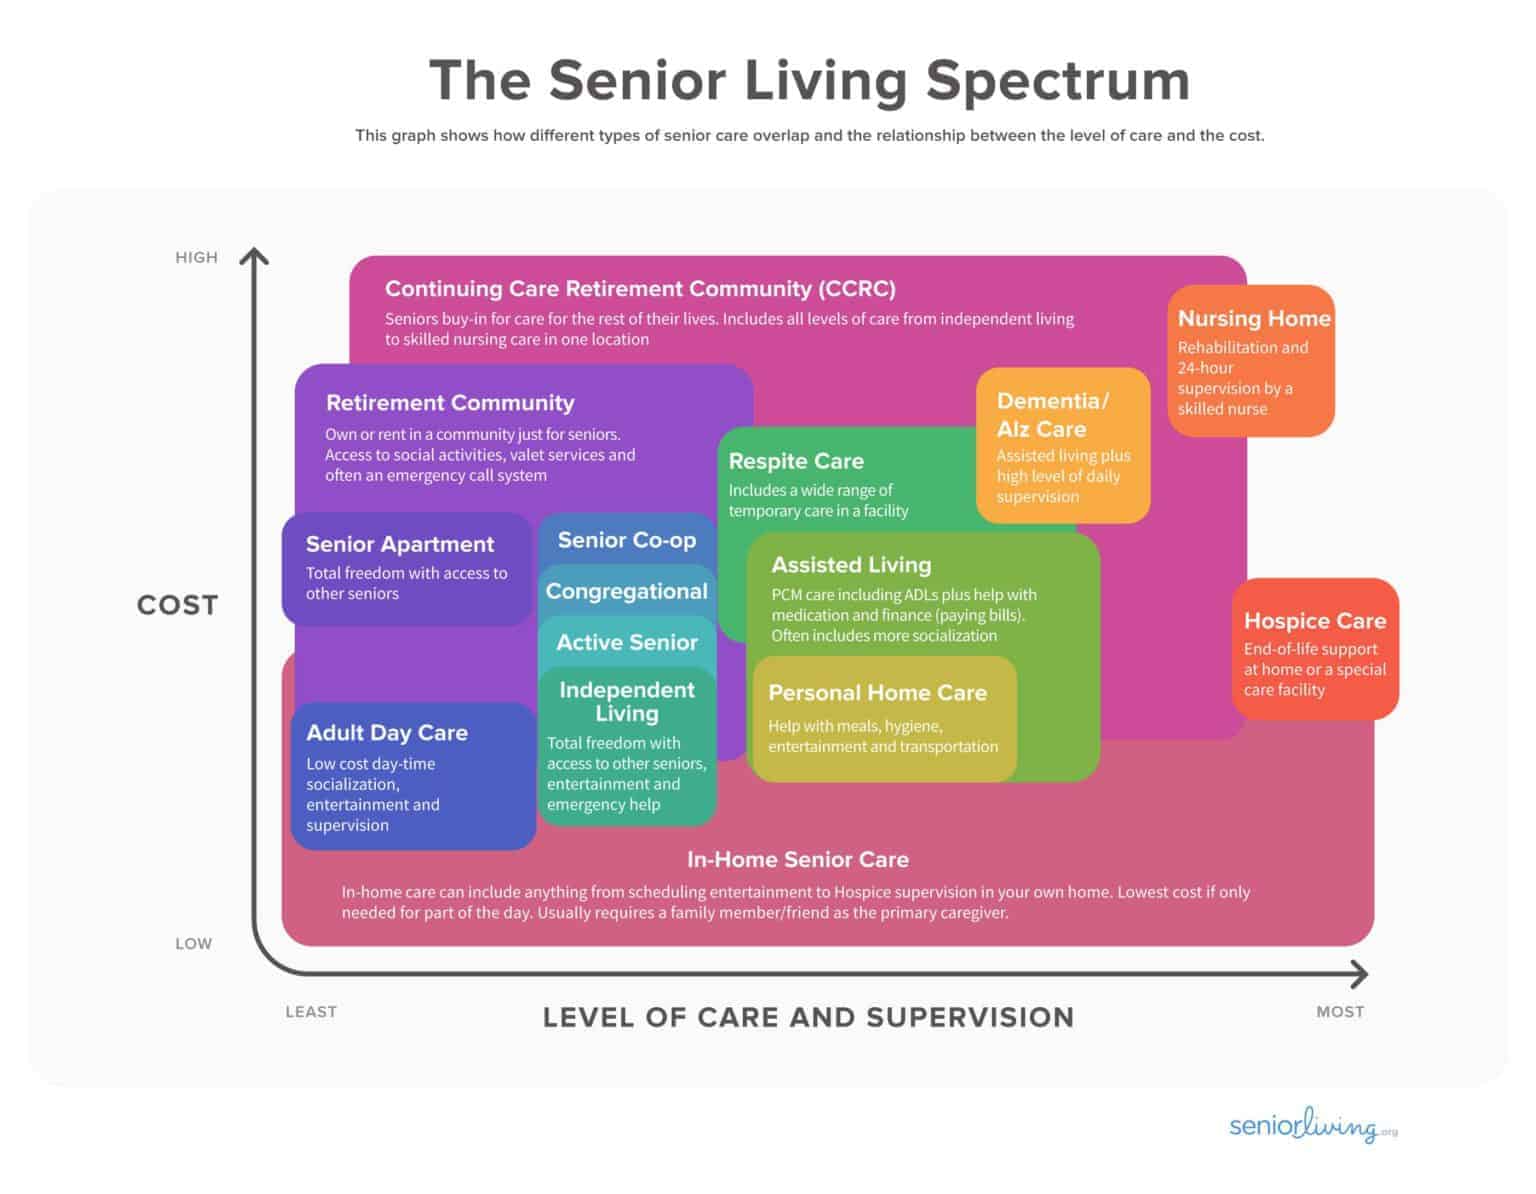 infographic of senior living options for older adults credit to seniorliving.org